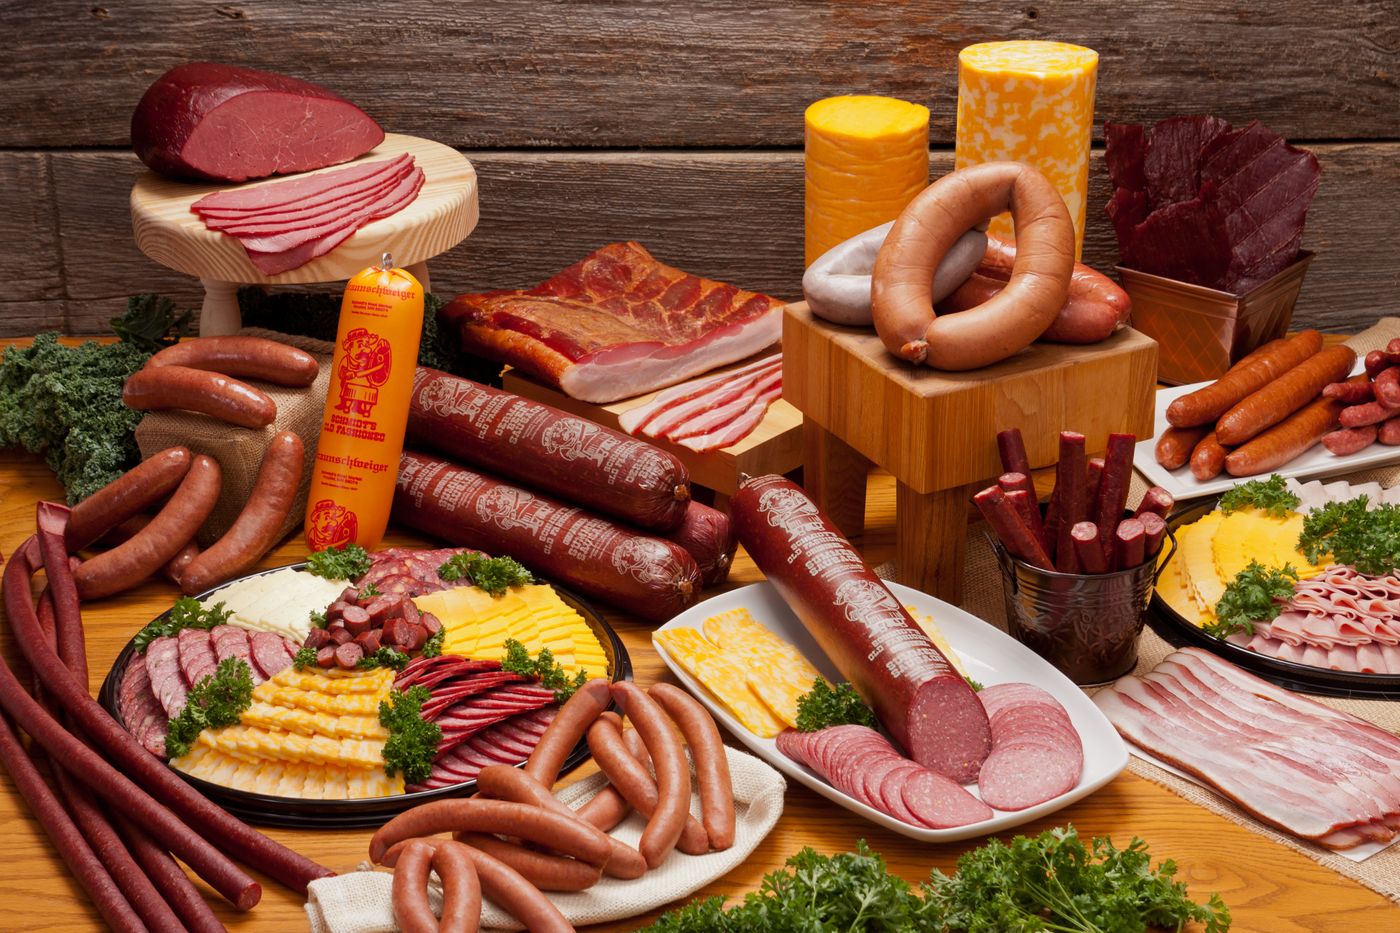 Are processed meats and even red meats carcinogens?